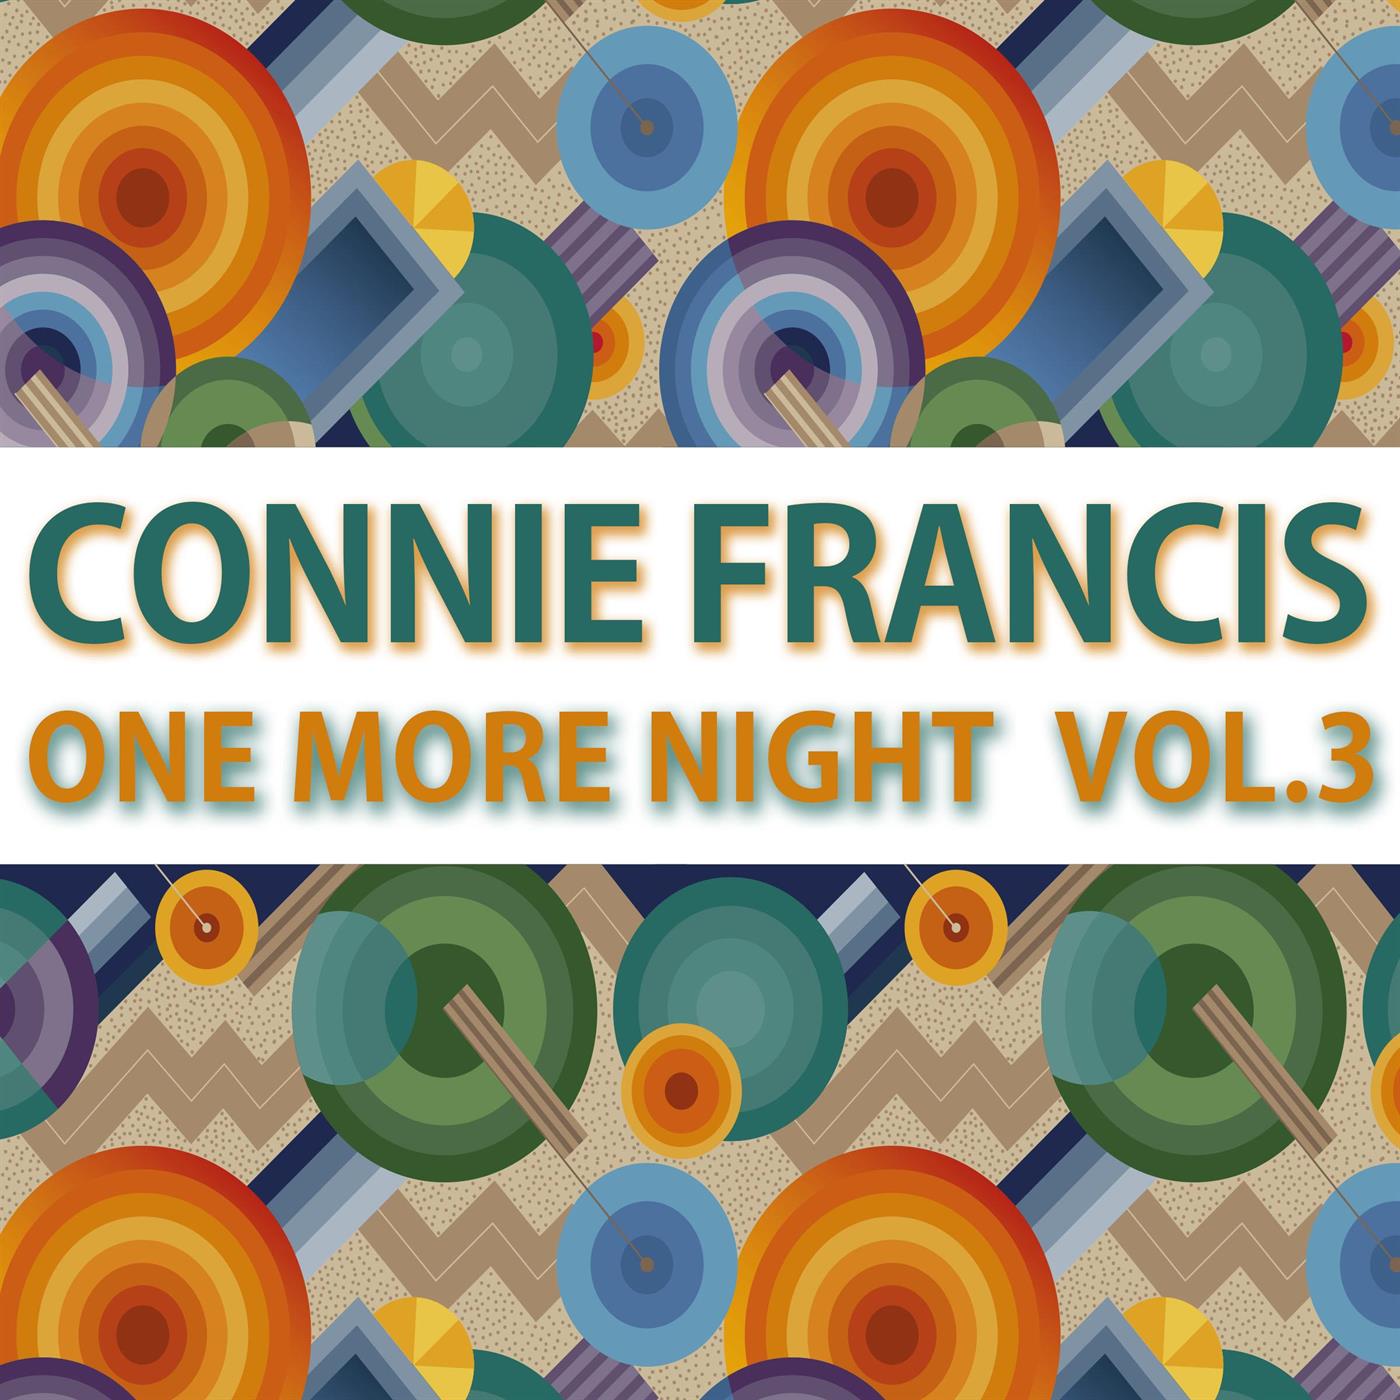 One More Night Vol. 3